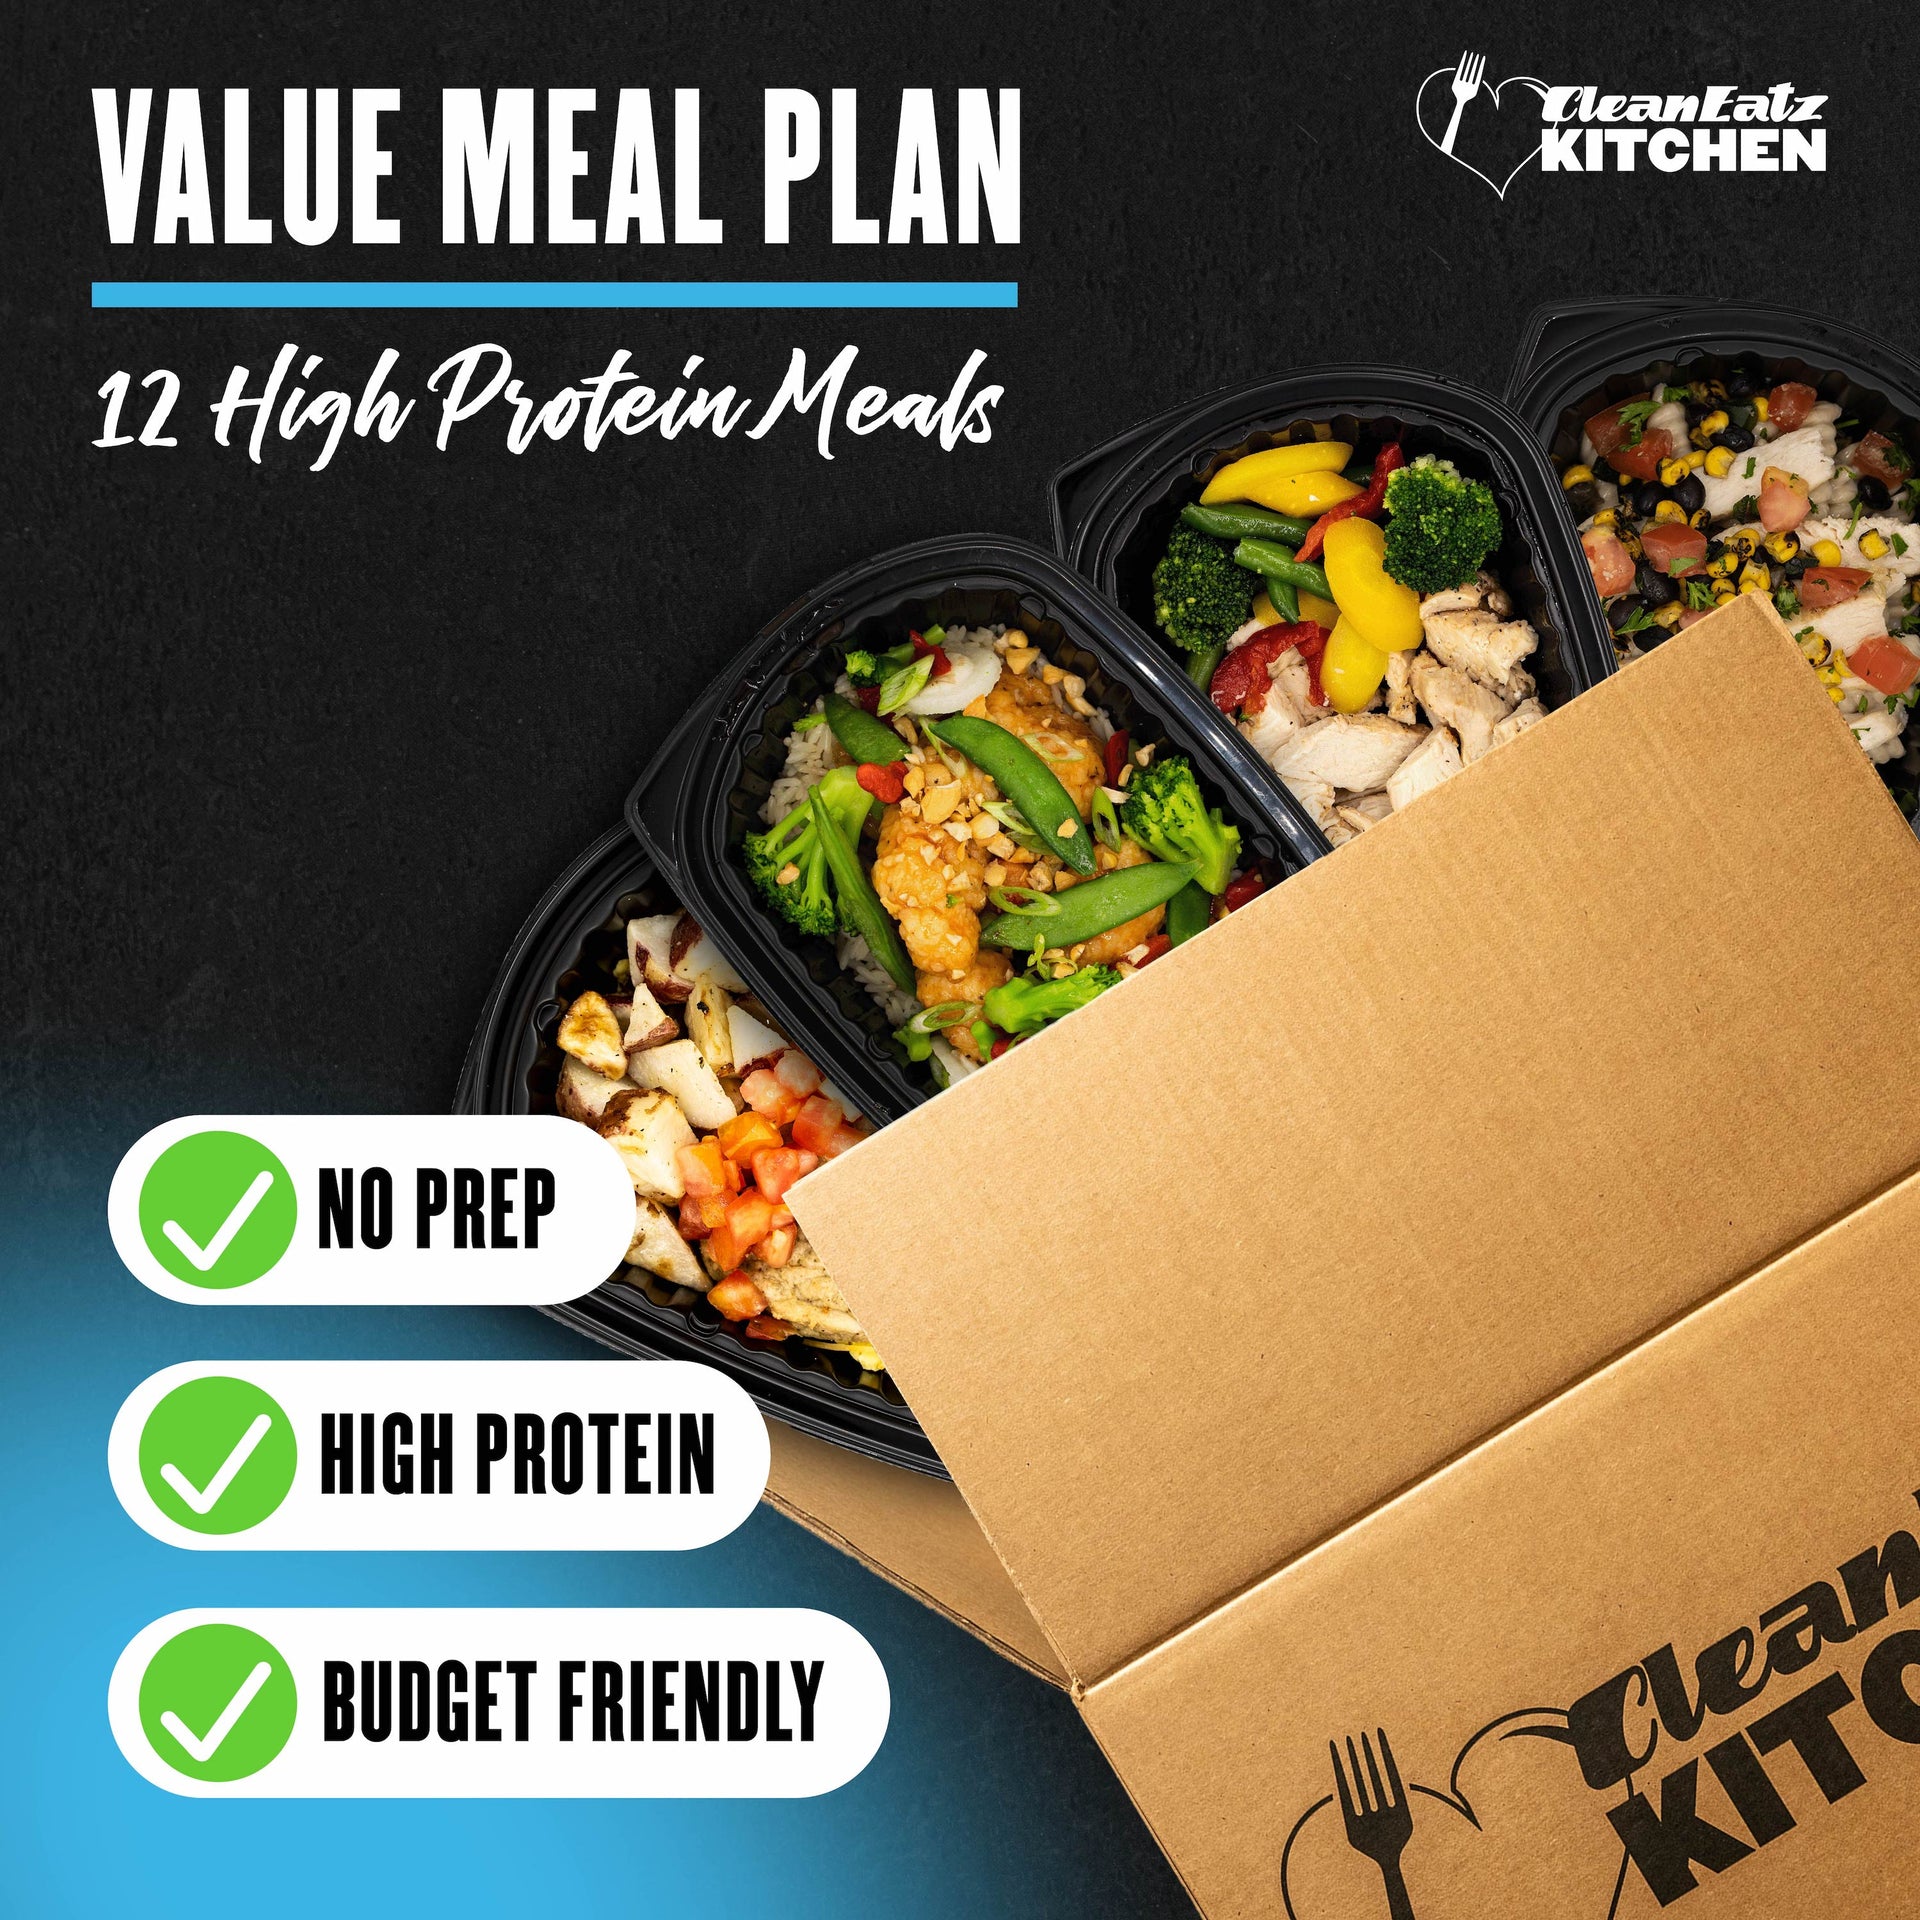 Value-conscious meal packages